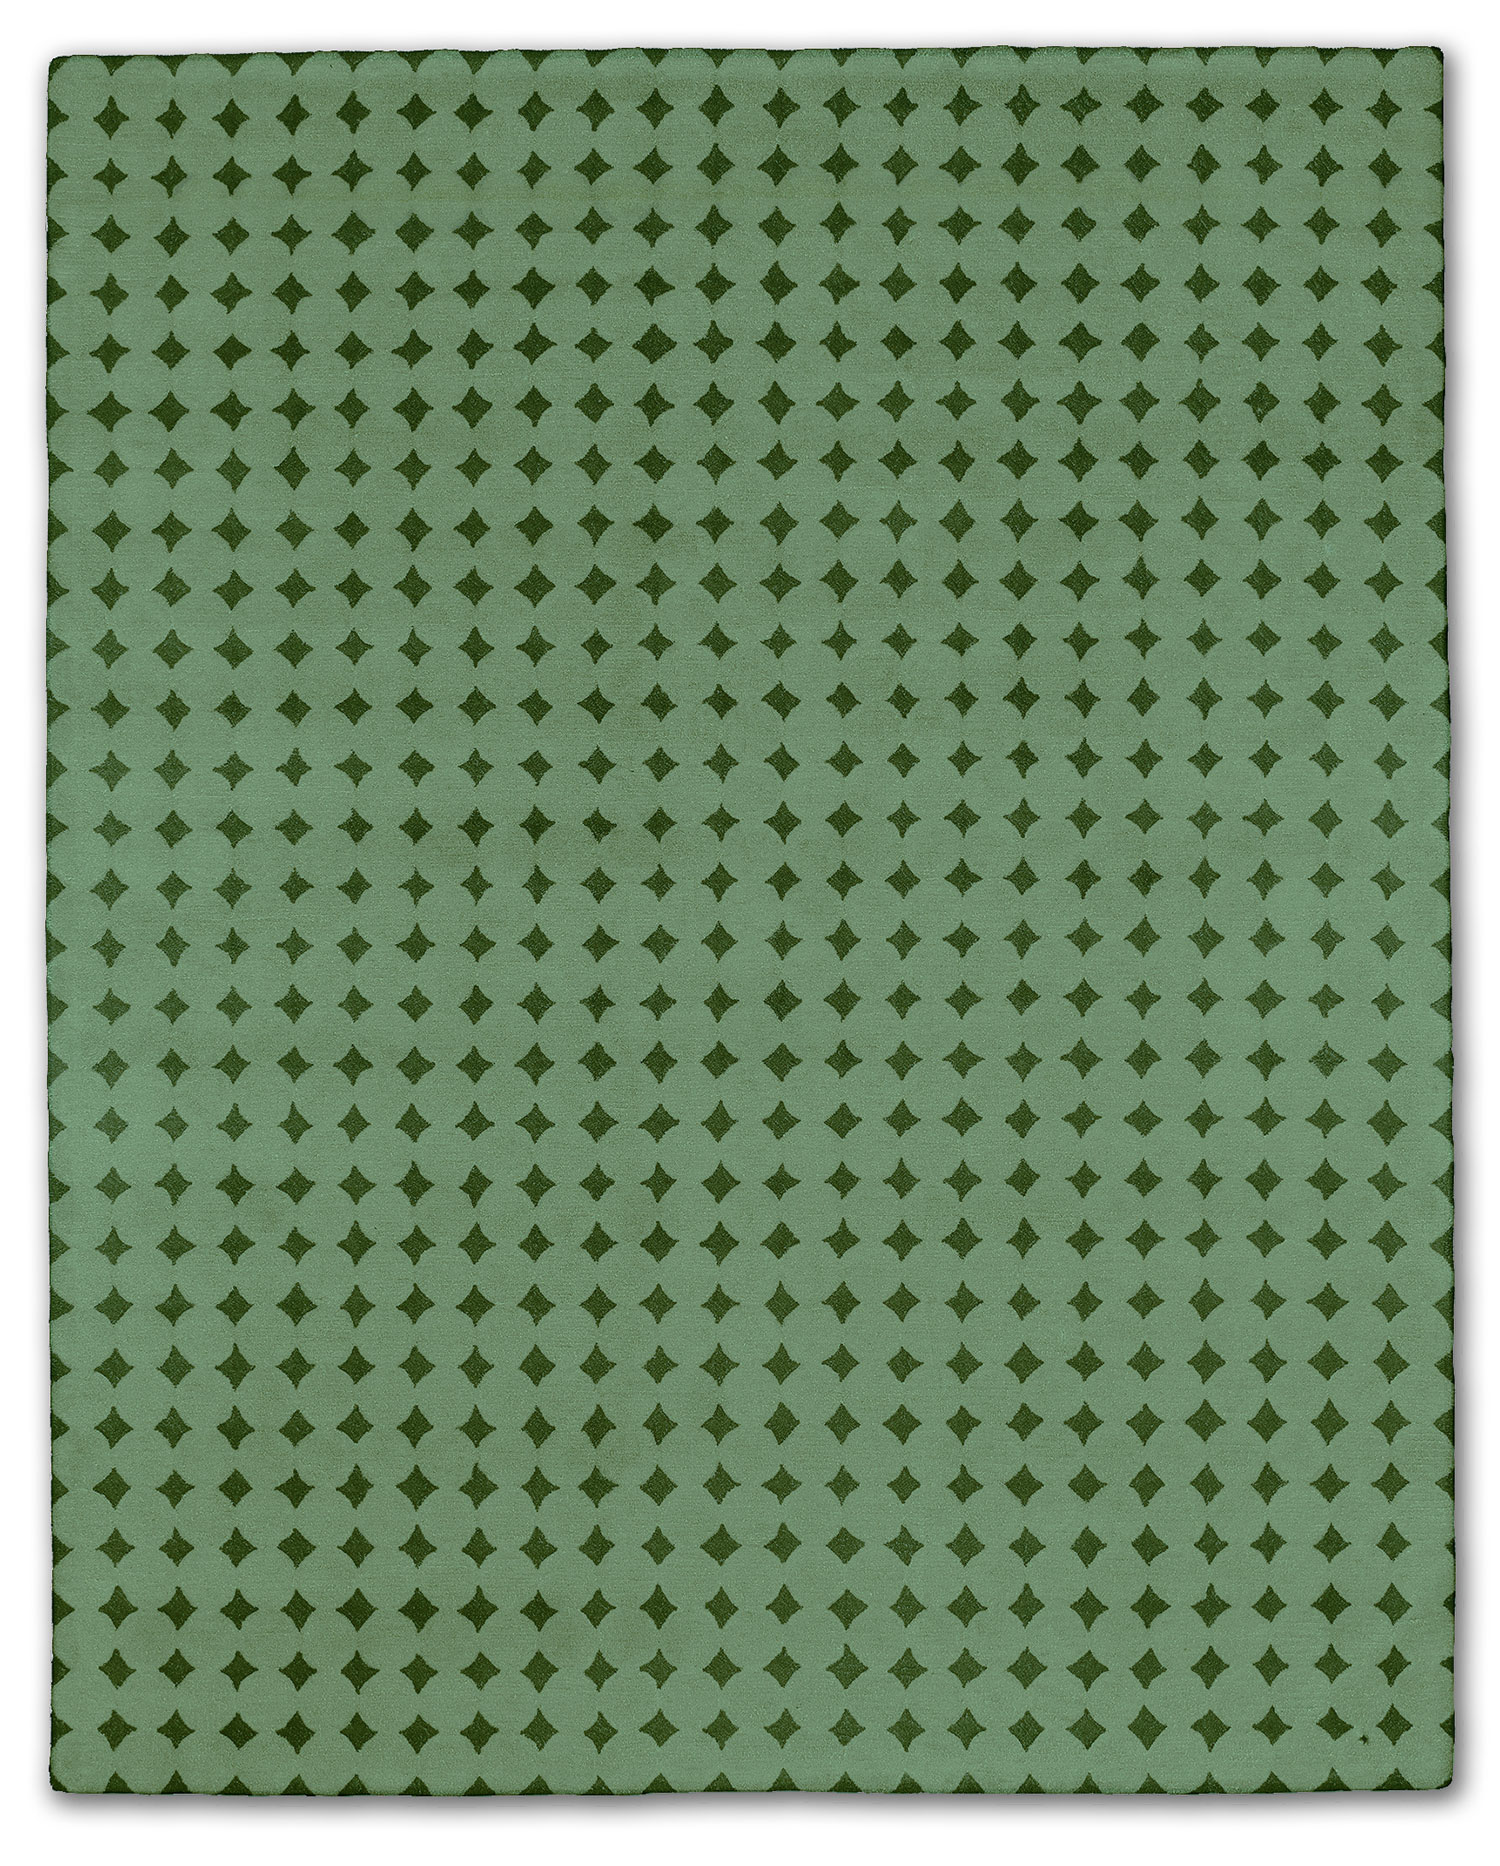 A green area rug called Bongo Fresca in an 8 by 10 foot size